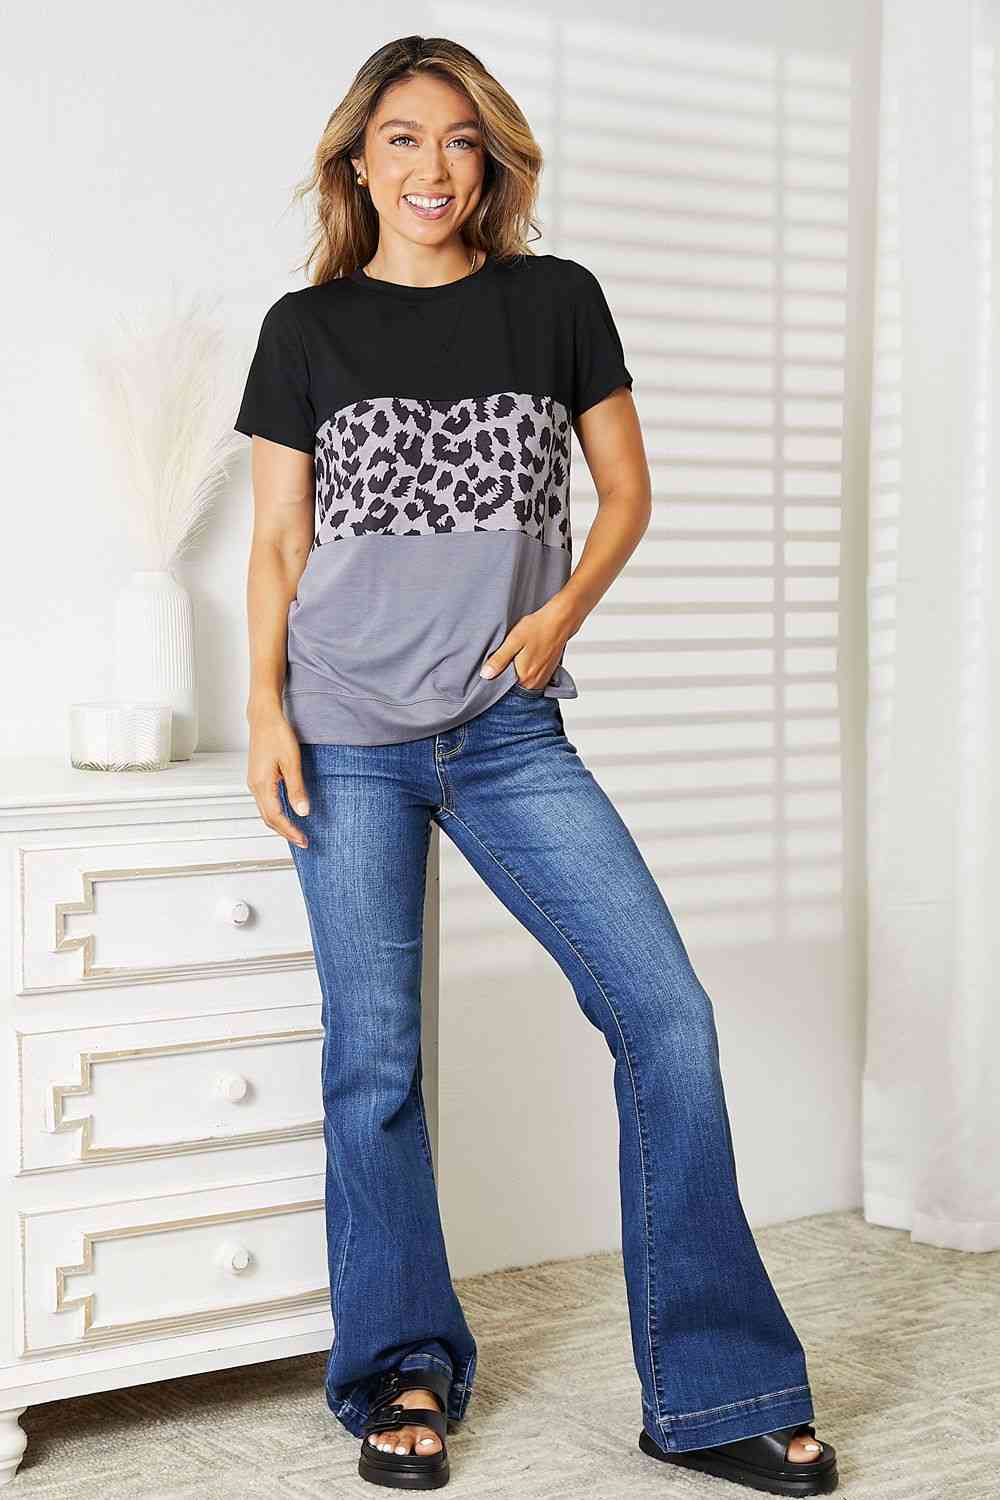 Double Take Leopard Print Color Block Short Sleeve T-Shirt - The Teal Antler Boutique